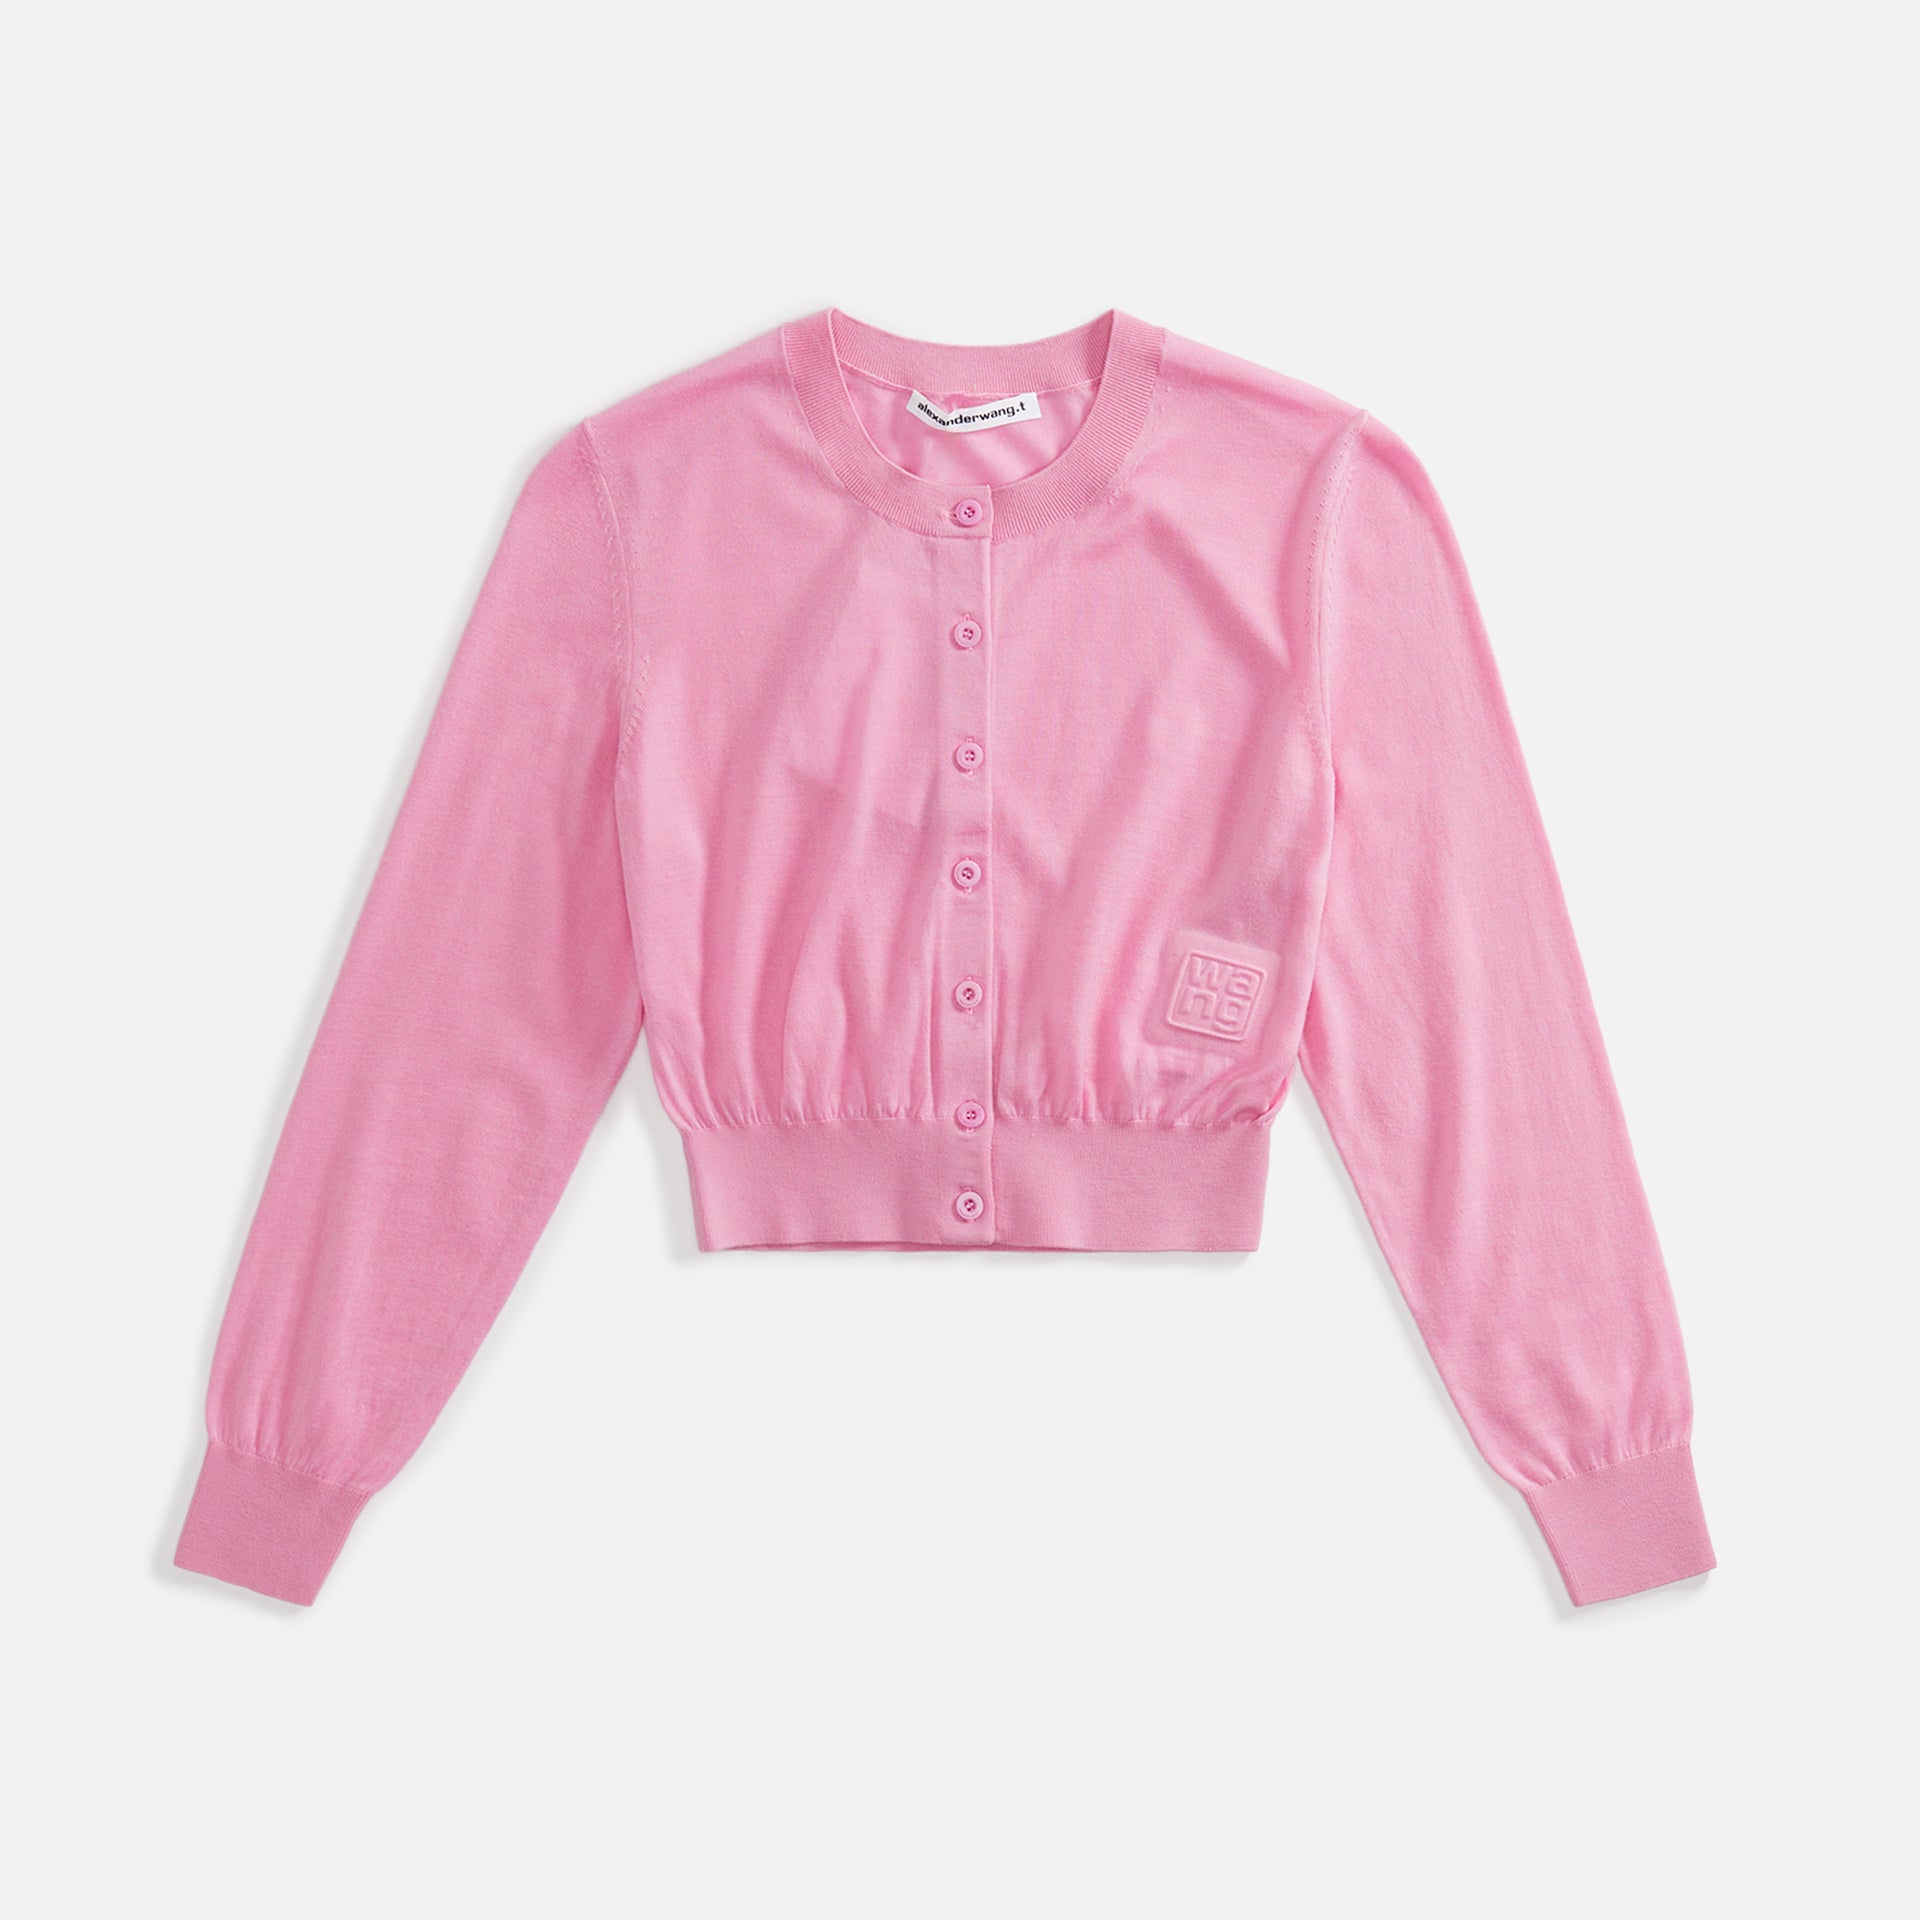 T by Alexander Wang Superfine Cropped Crewneck Cardi - Candy Pink